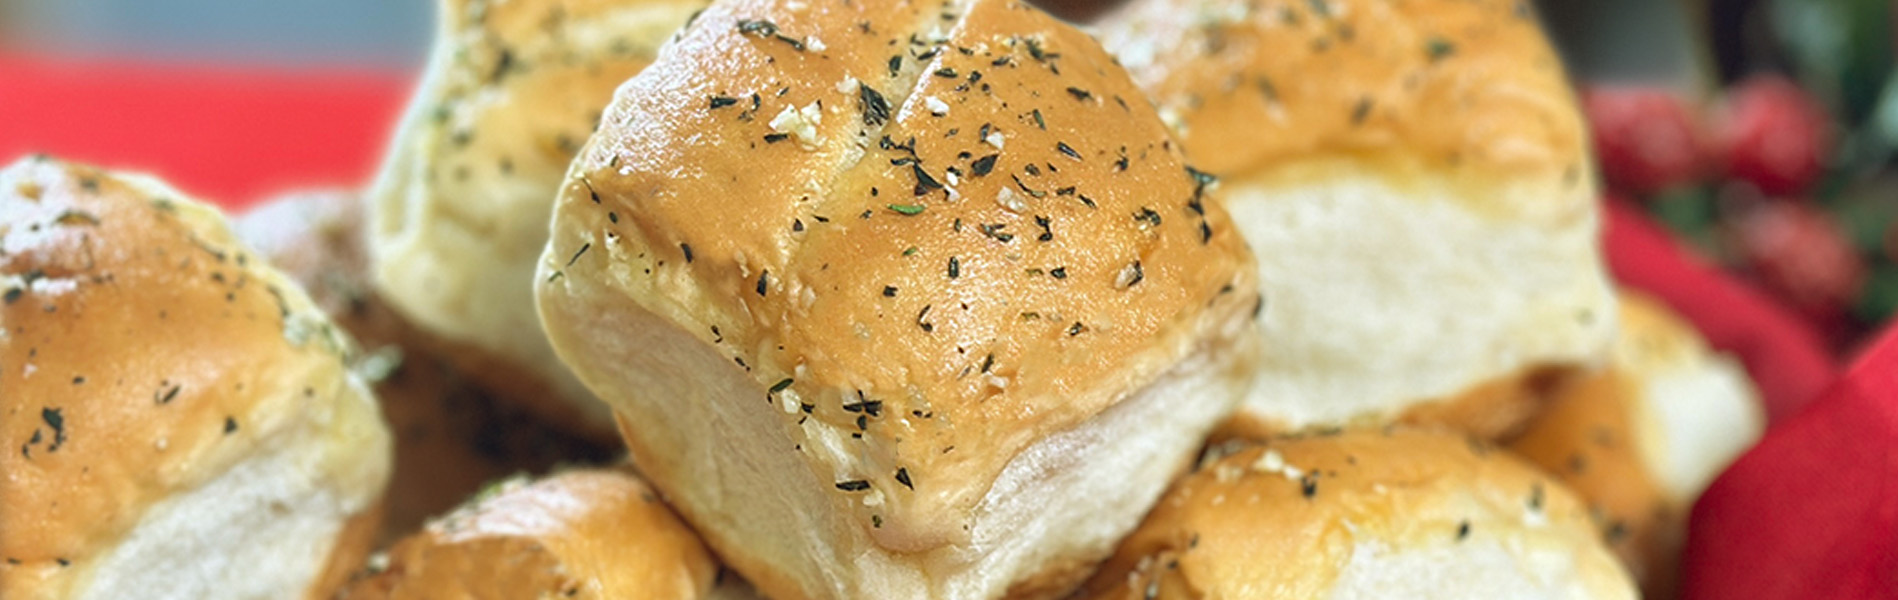 Artesano Bakery Rolls topped with garlic butter, rosemary and thyme 